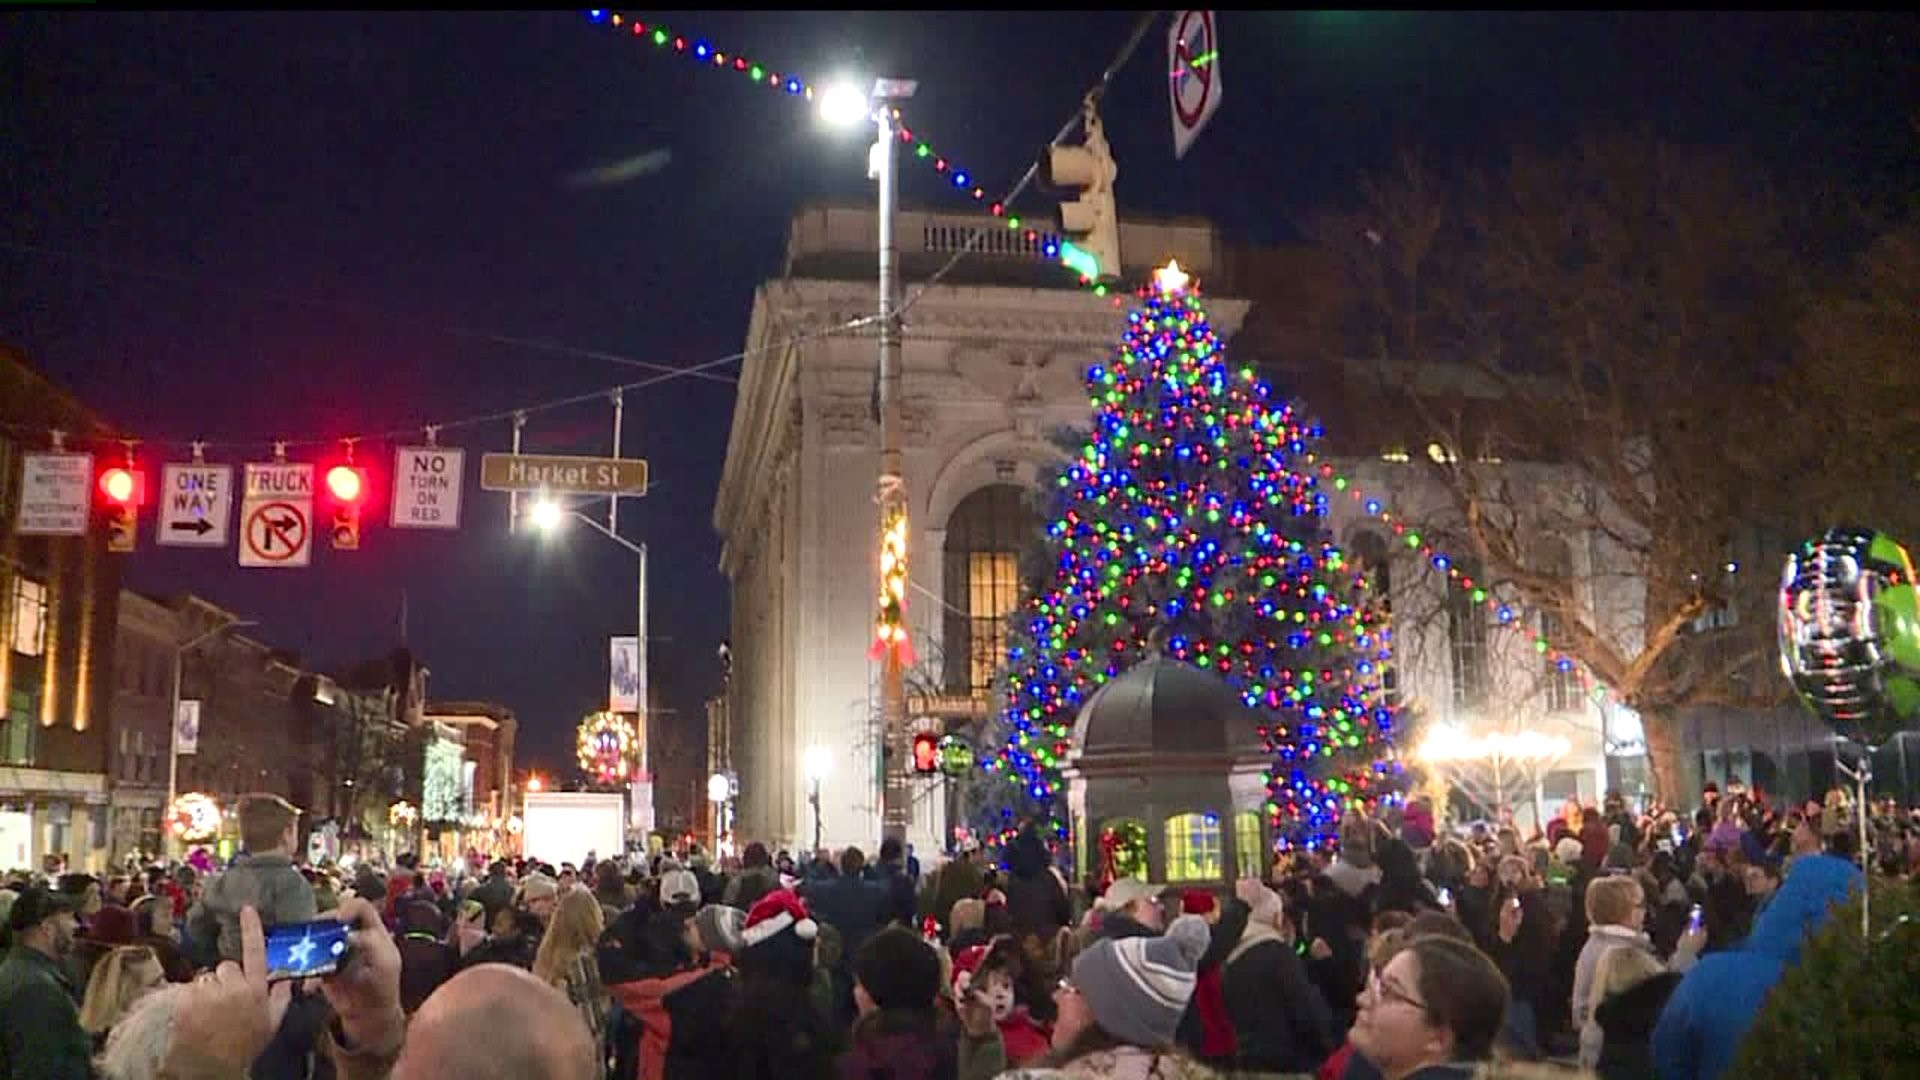 City of York lights up for the holidays